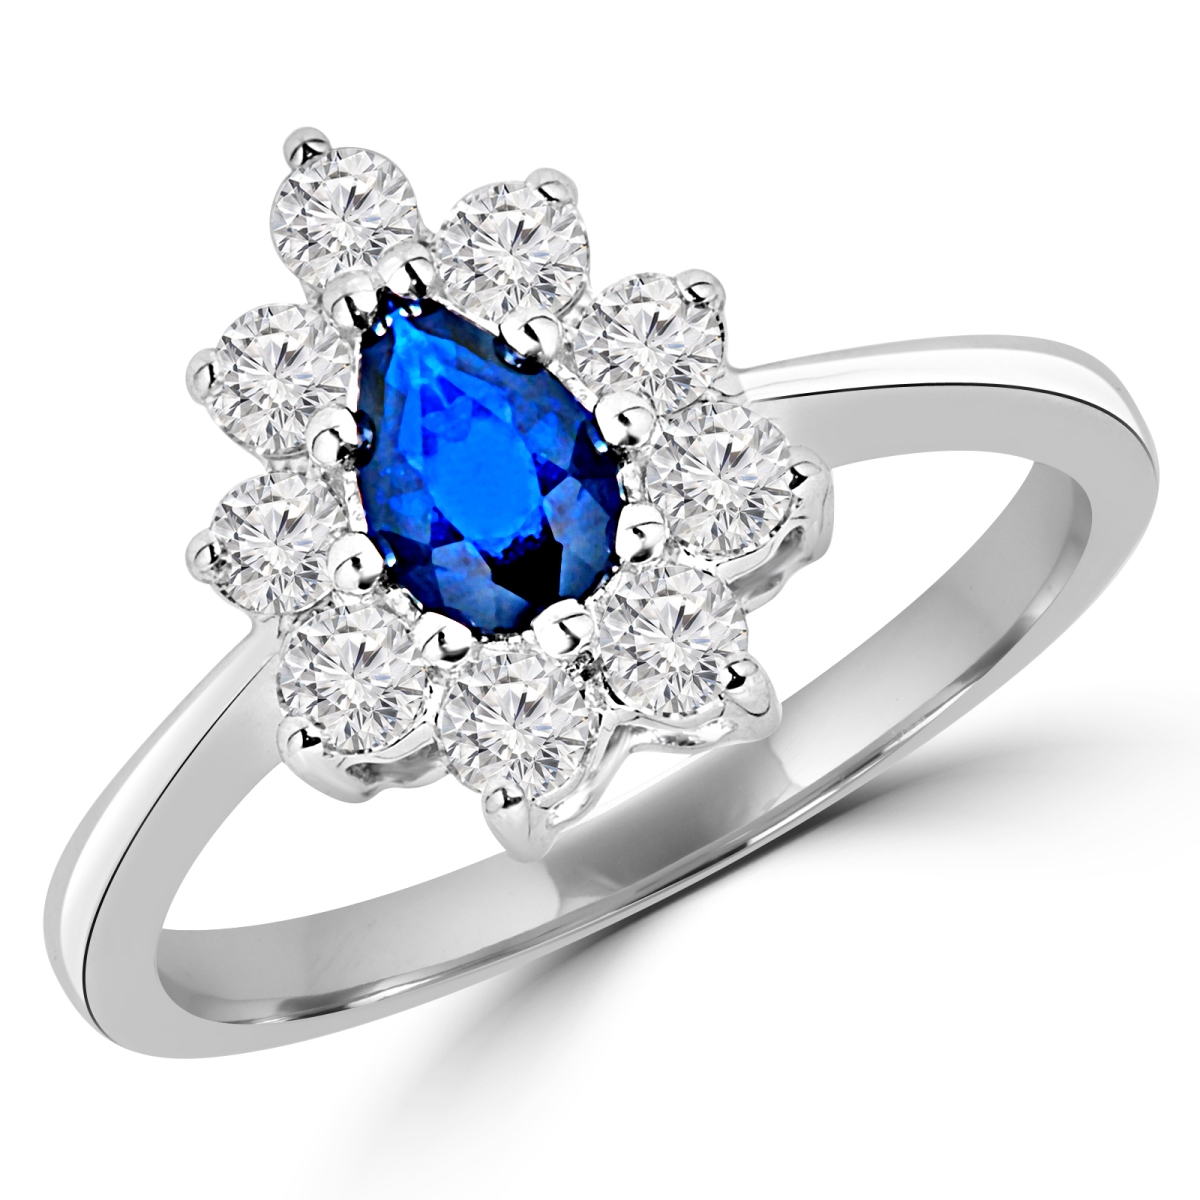 Picture of Majesty Diamonds MD180236-3 1 CTW Pear Blue Sapphire Halo Cocktail Ring in 14K White Gold - Size 3